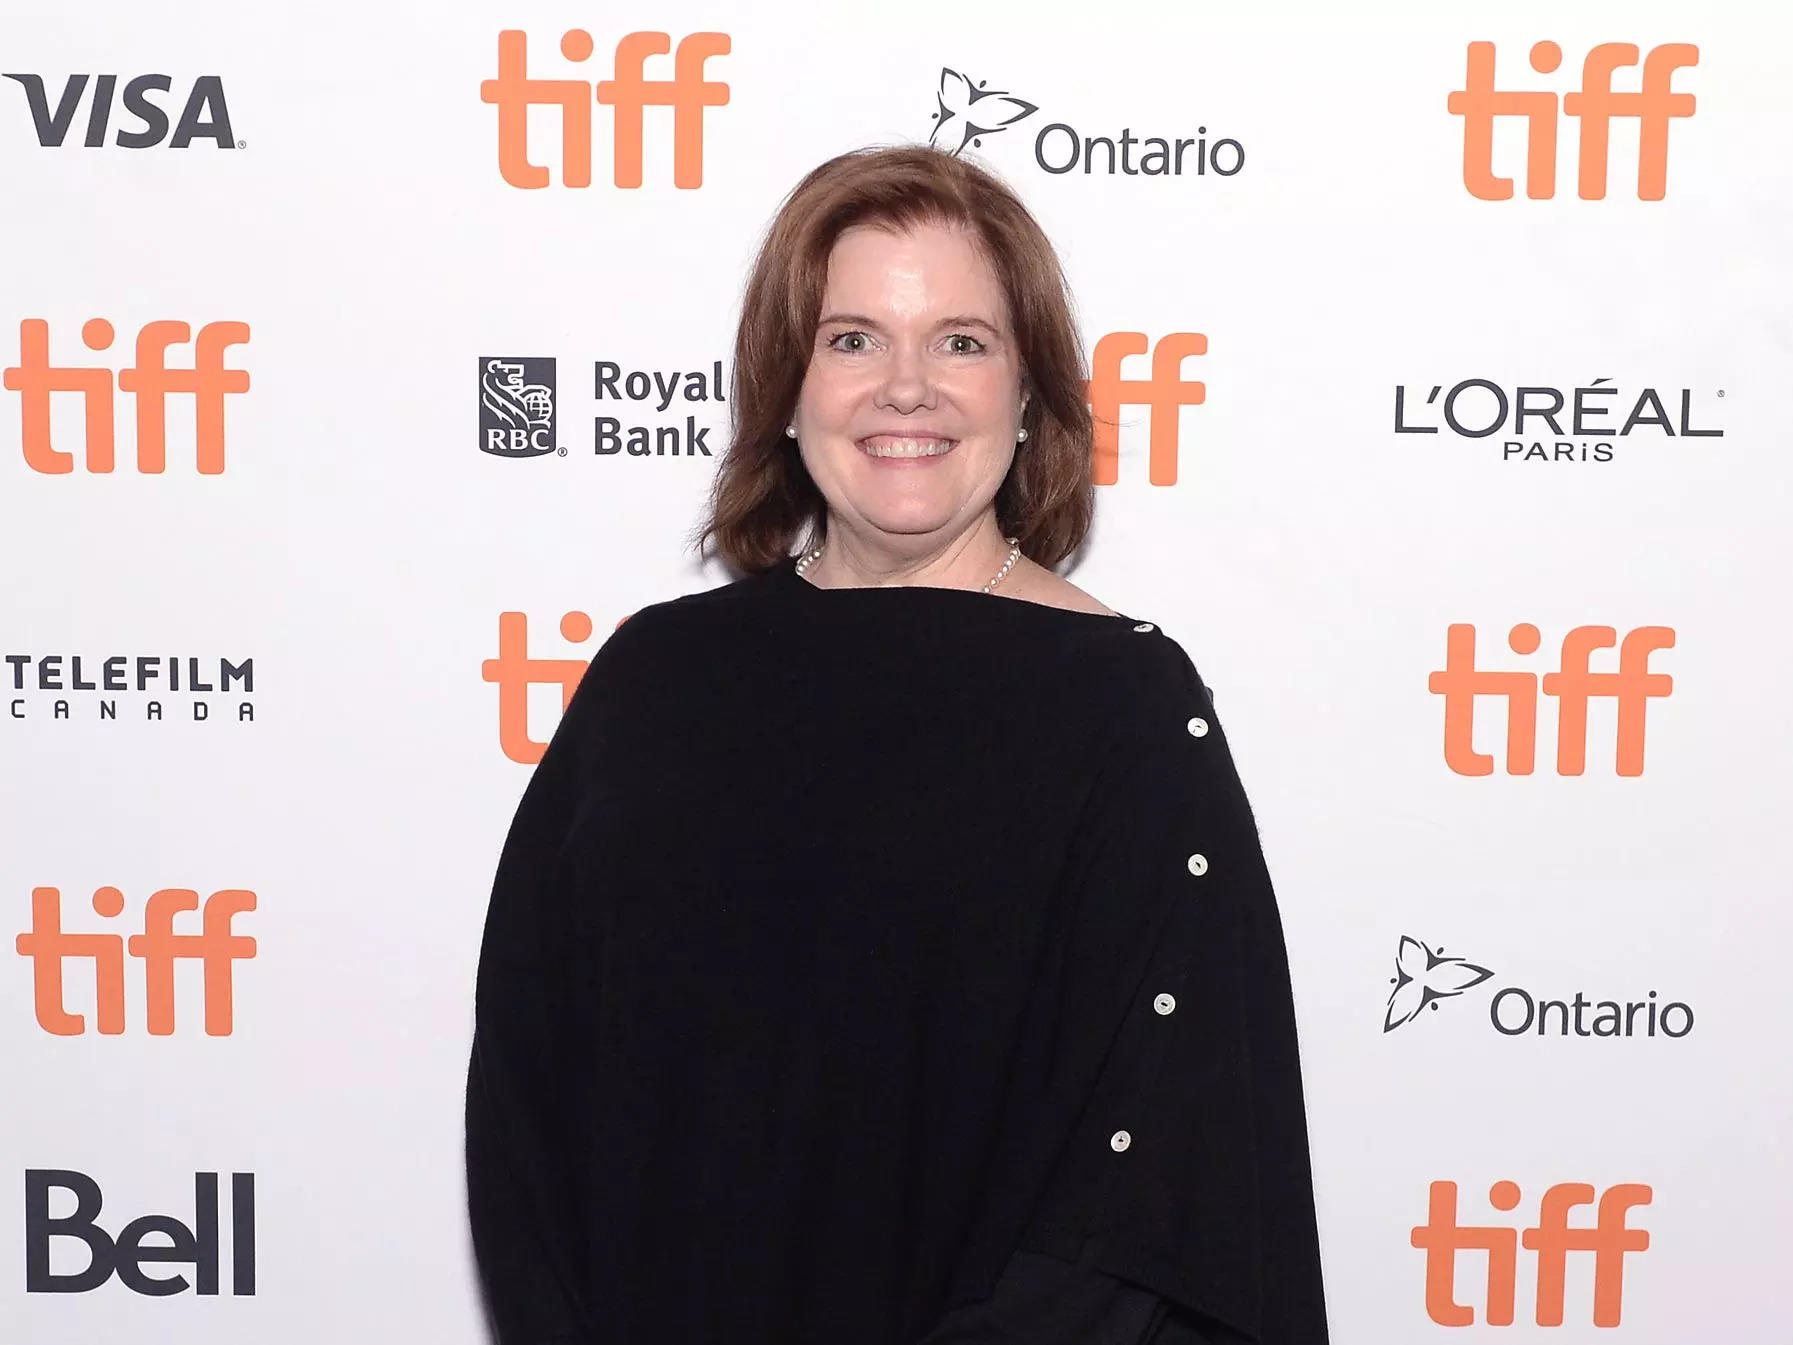 Kate Harrington at the "The Capote Tapes" TIFF Premiere Party in 2019 in Toronto.